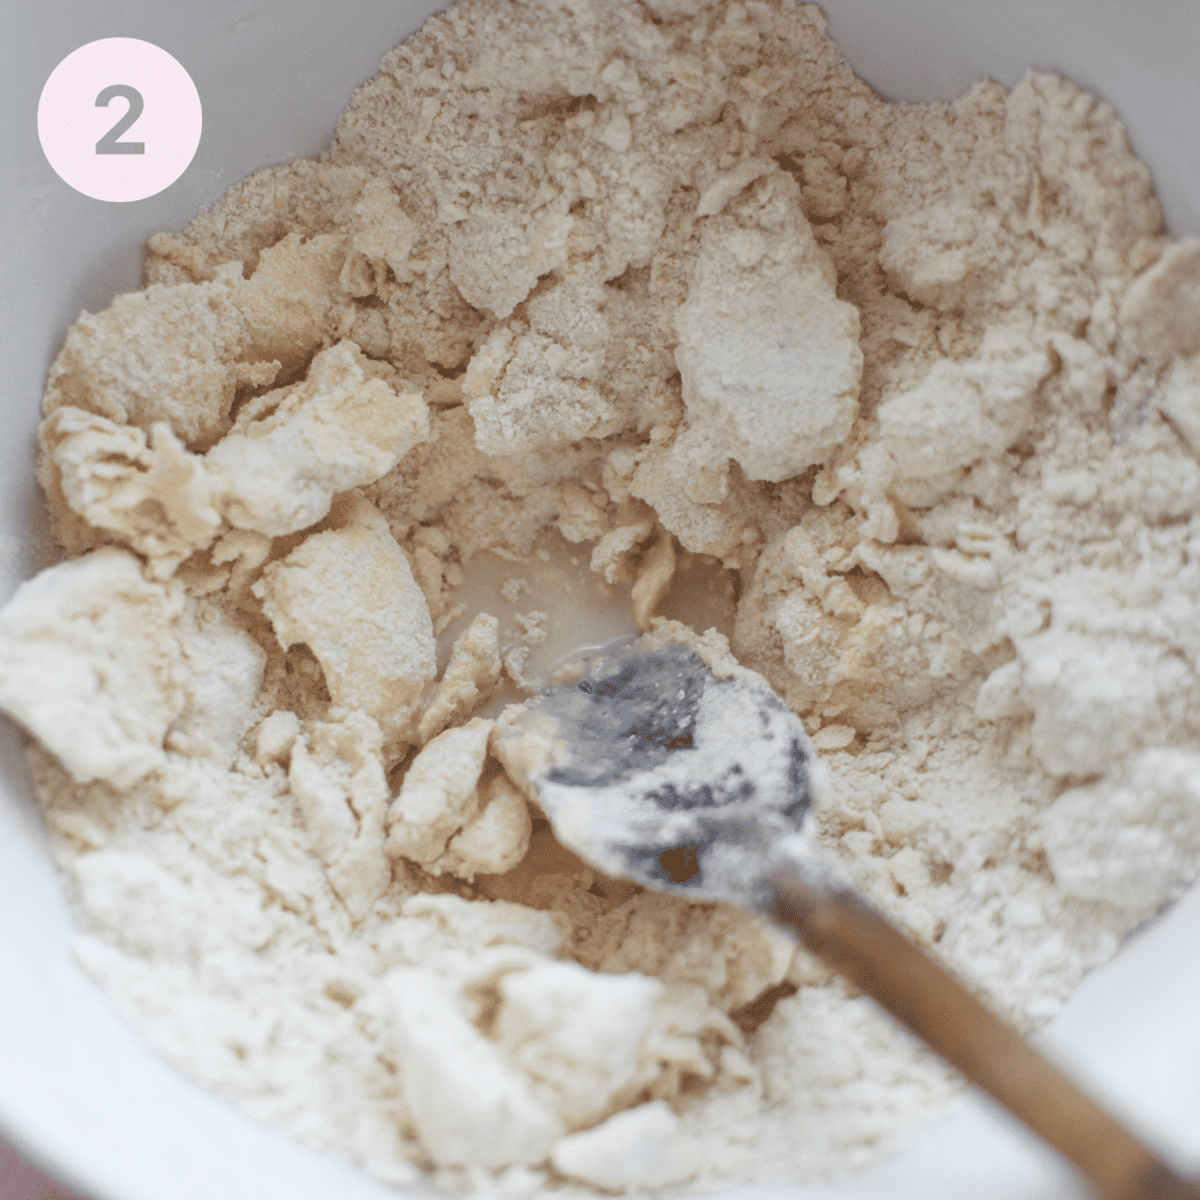 Mixing shortbread ingredients in a large mixing bowl.